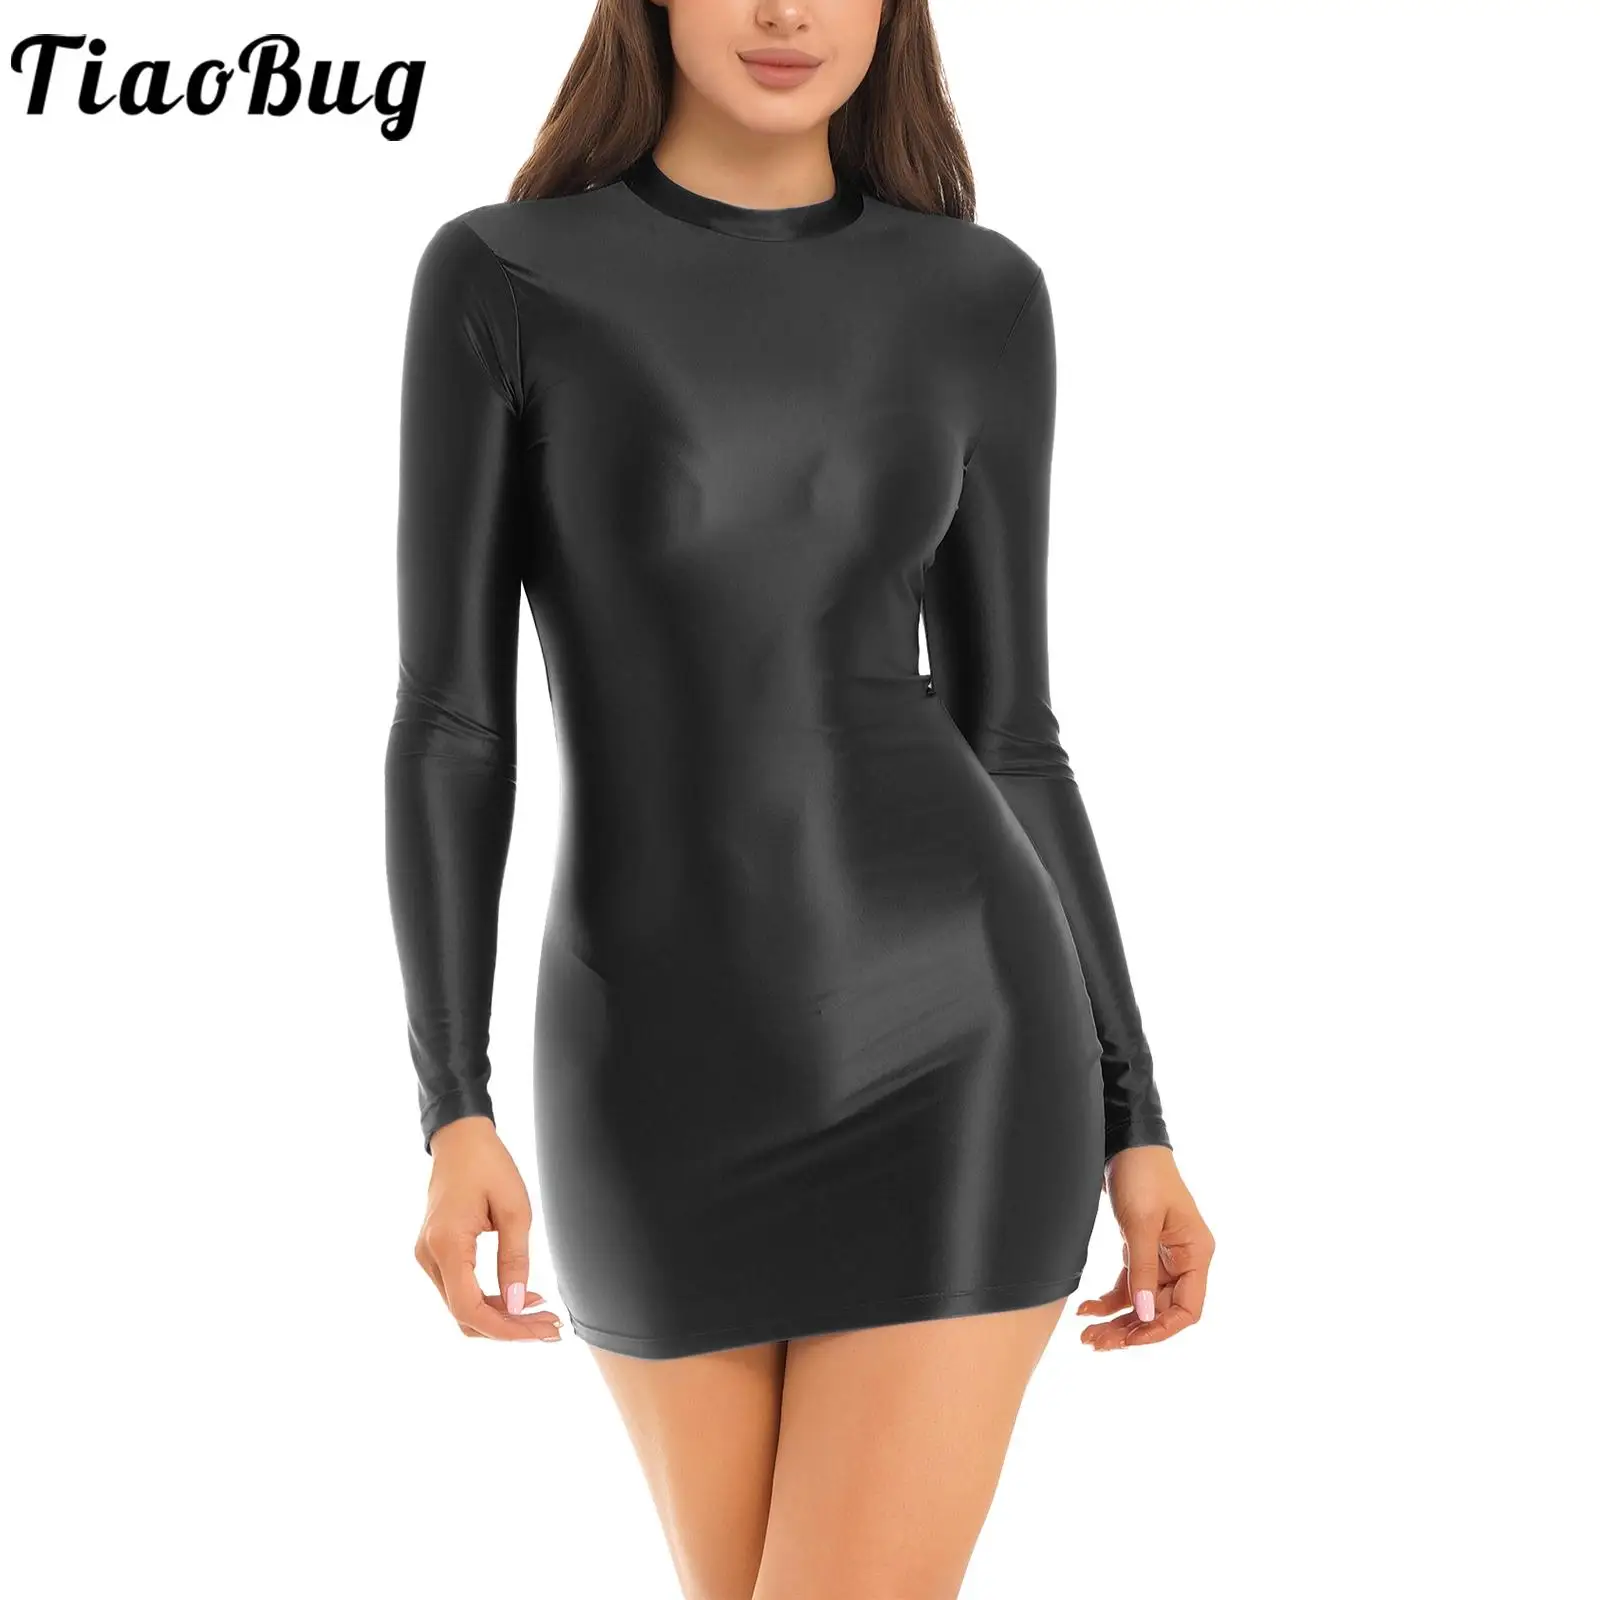 short dress push up bra mini micro dress wet look latex bodycon faux leather 2022 new women sexy solid backless club party black Women Sexy Oil Glossy Micro Mini Dress Tight Party Dress Pencil Bodycon Dress Club Outfit Nightwear Pole Dancing Costume